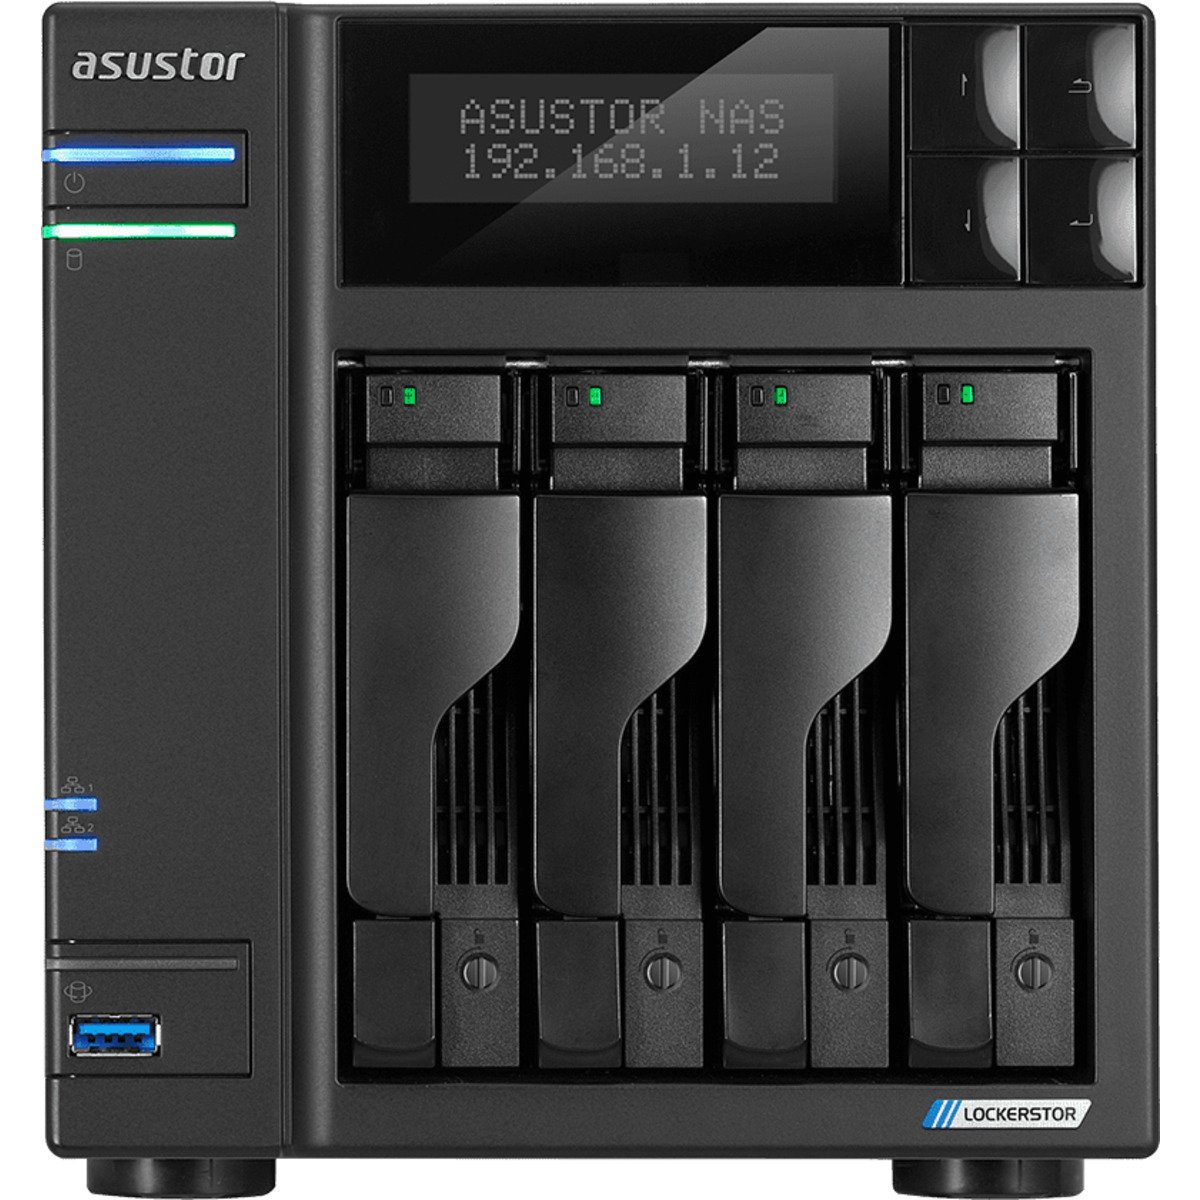 ASUSTOR AS6604T Lockerstor 4 24tb 4-Bay Desktop Multimedia / Power User / Business NAS - Network Attached Storage Device 4x6tb Seagate EXOS 7E10 ST6000NM019B 3.5 7200rpm SATA 6Gb/s HDD ENTERPRISE Class Drives Installed - Burn-In Tested - FREE RAM UPGRADE AS6604T Lockerstor 4